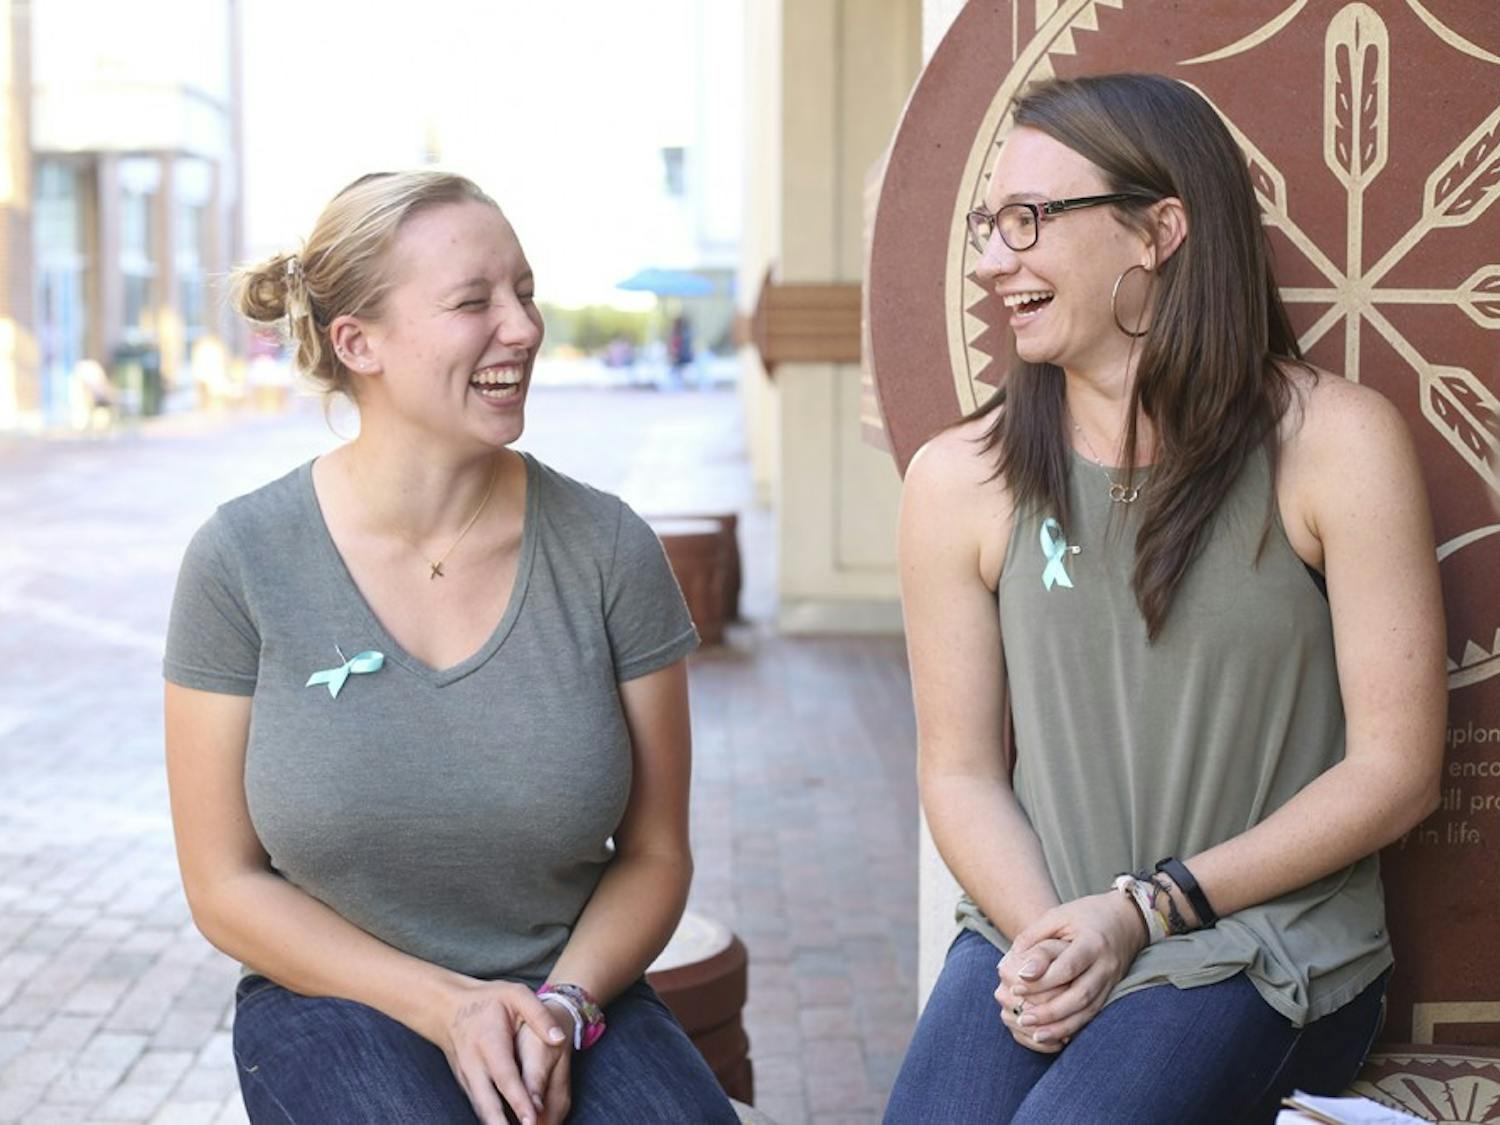 Emma Johnson(left) and Hannah Petersen(right) were interviewed on their project "Our Story" event where survivors of sexual assault talk about their experiences. 